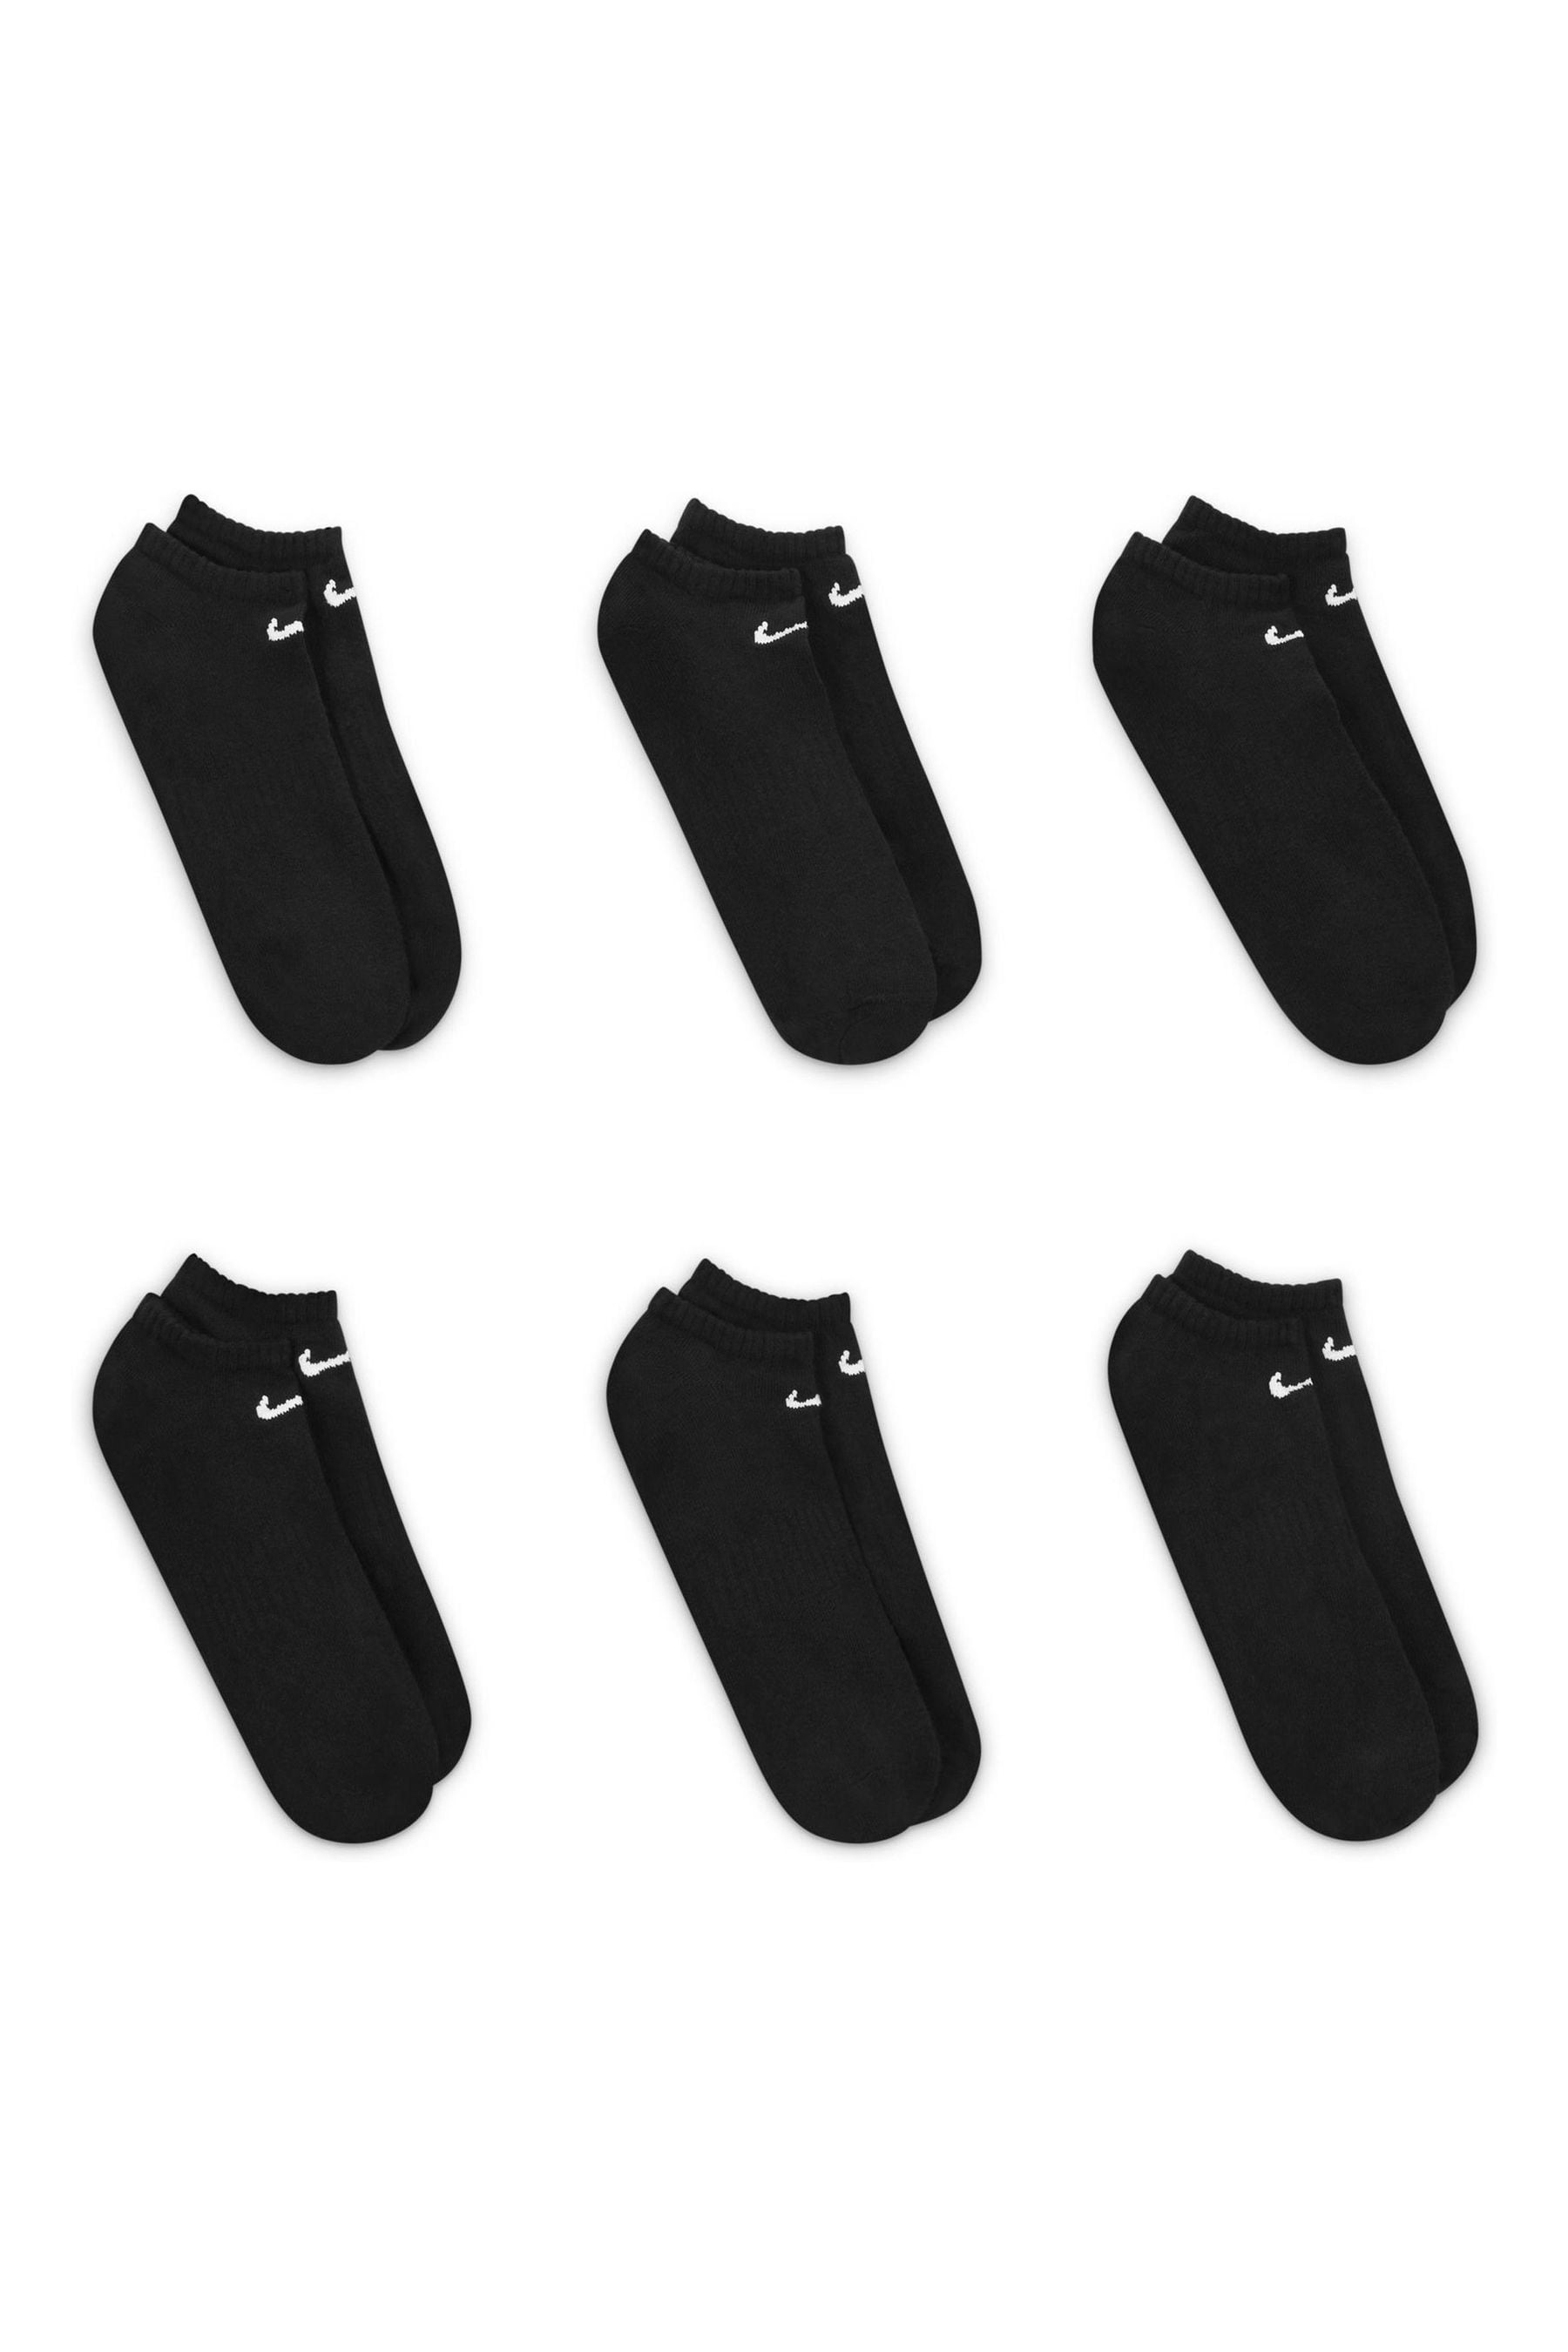 Buy Nike Black Everyday Lightweight Training No Show Socks 6 Pack from ...